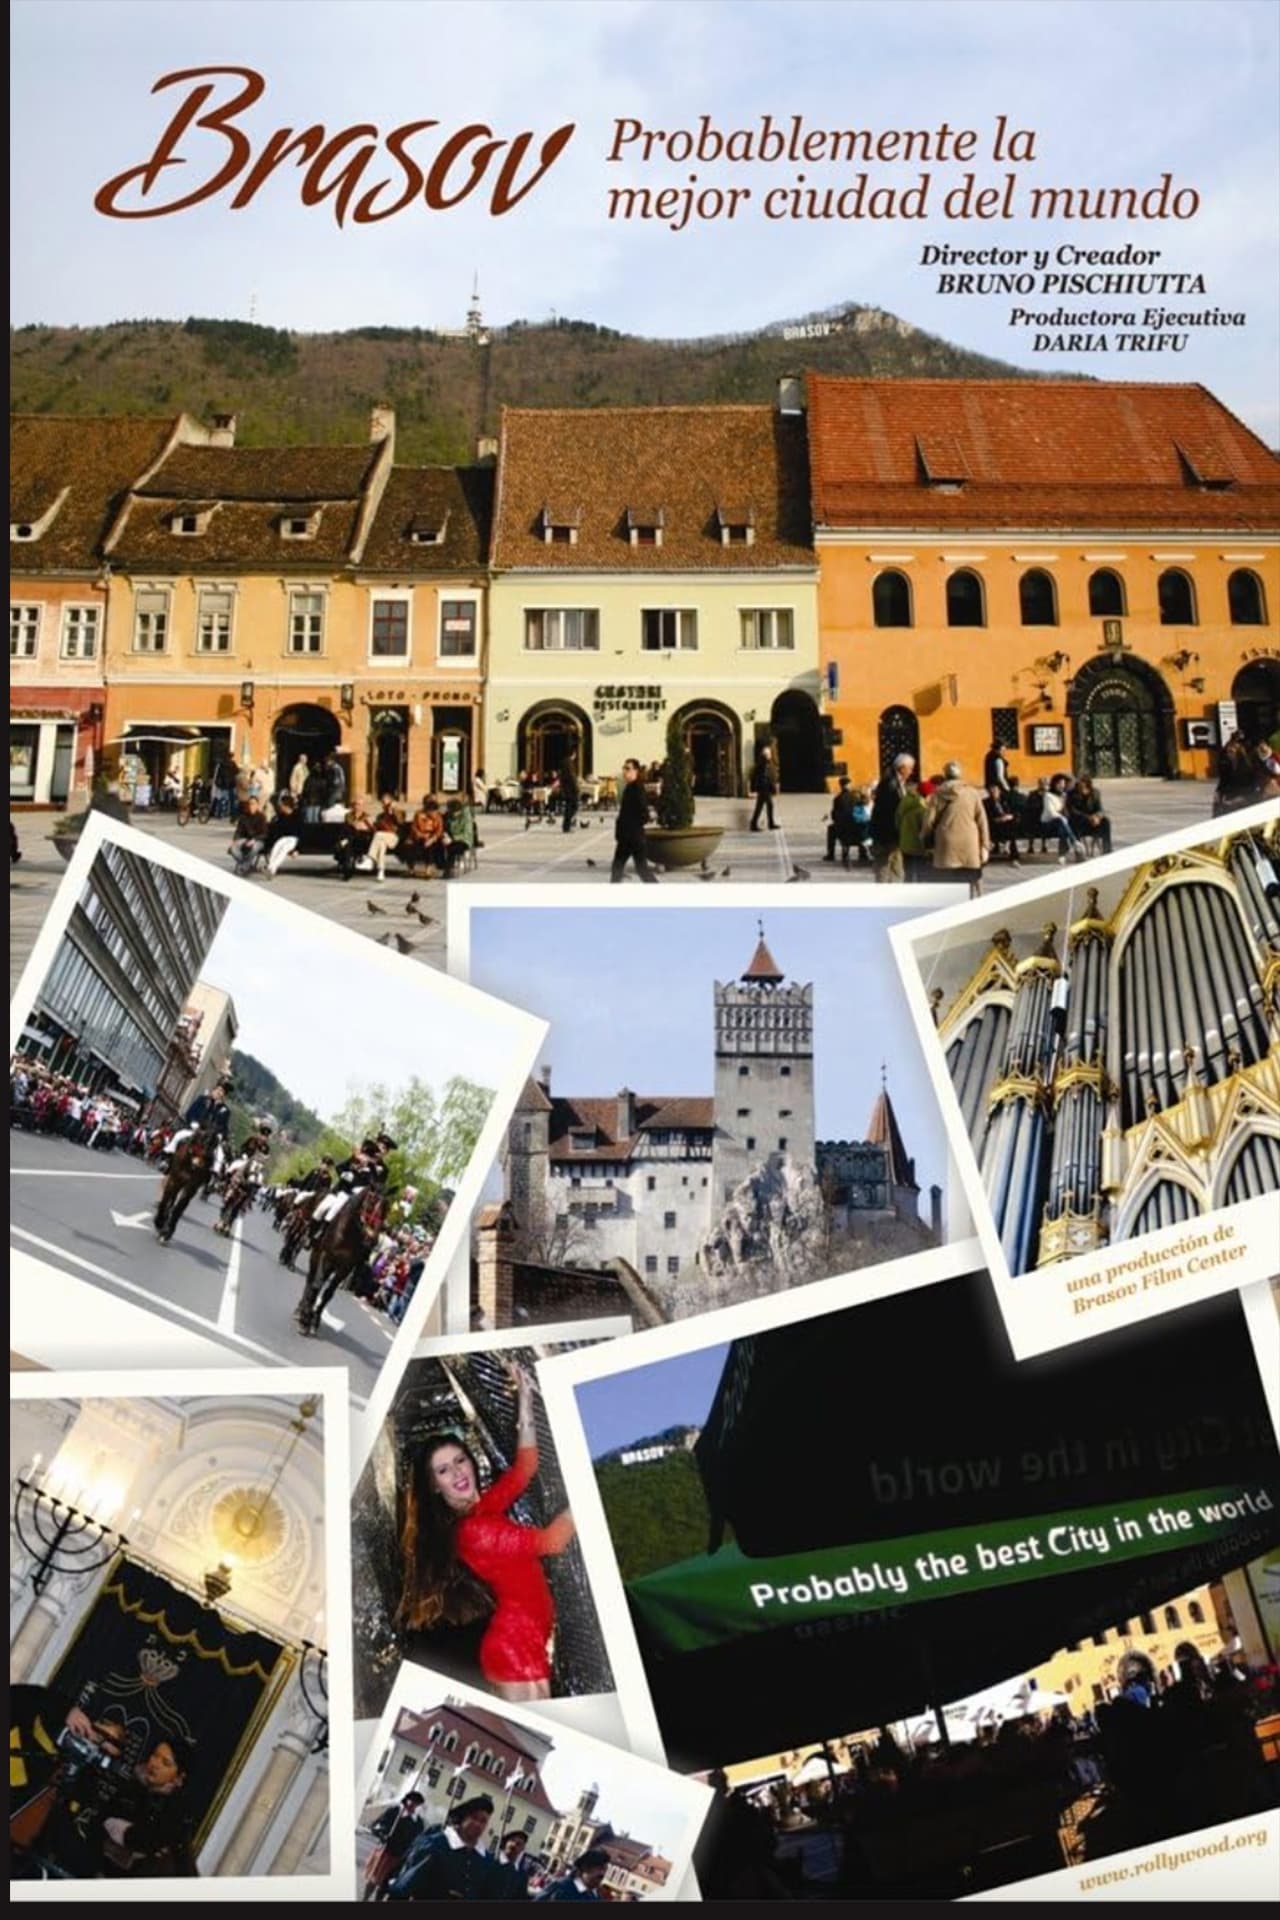 Brasov: Probably the Best City in the World